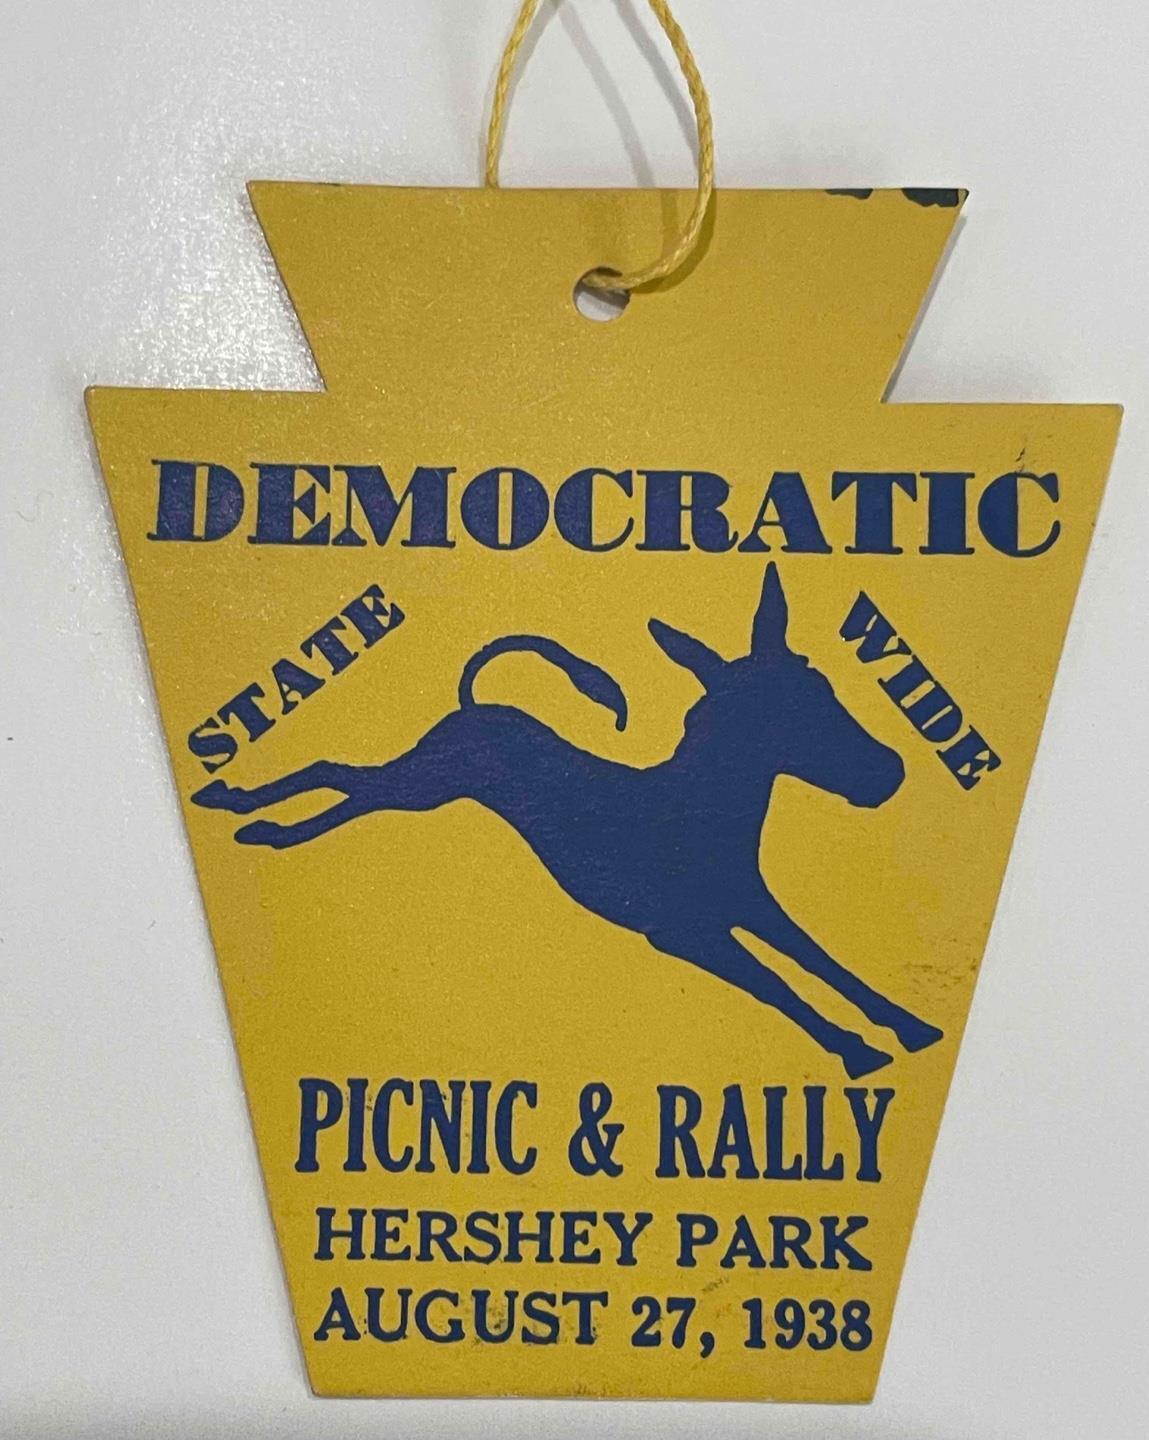 1938 HERSHEY PARK DEMOCRATIC STATEWIDE PICNIC & RALLY AUGUST 27 KEYSTONE TAG